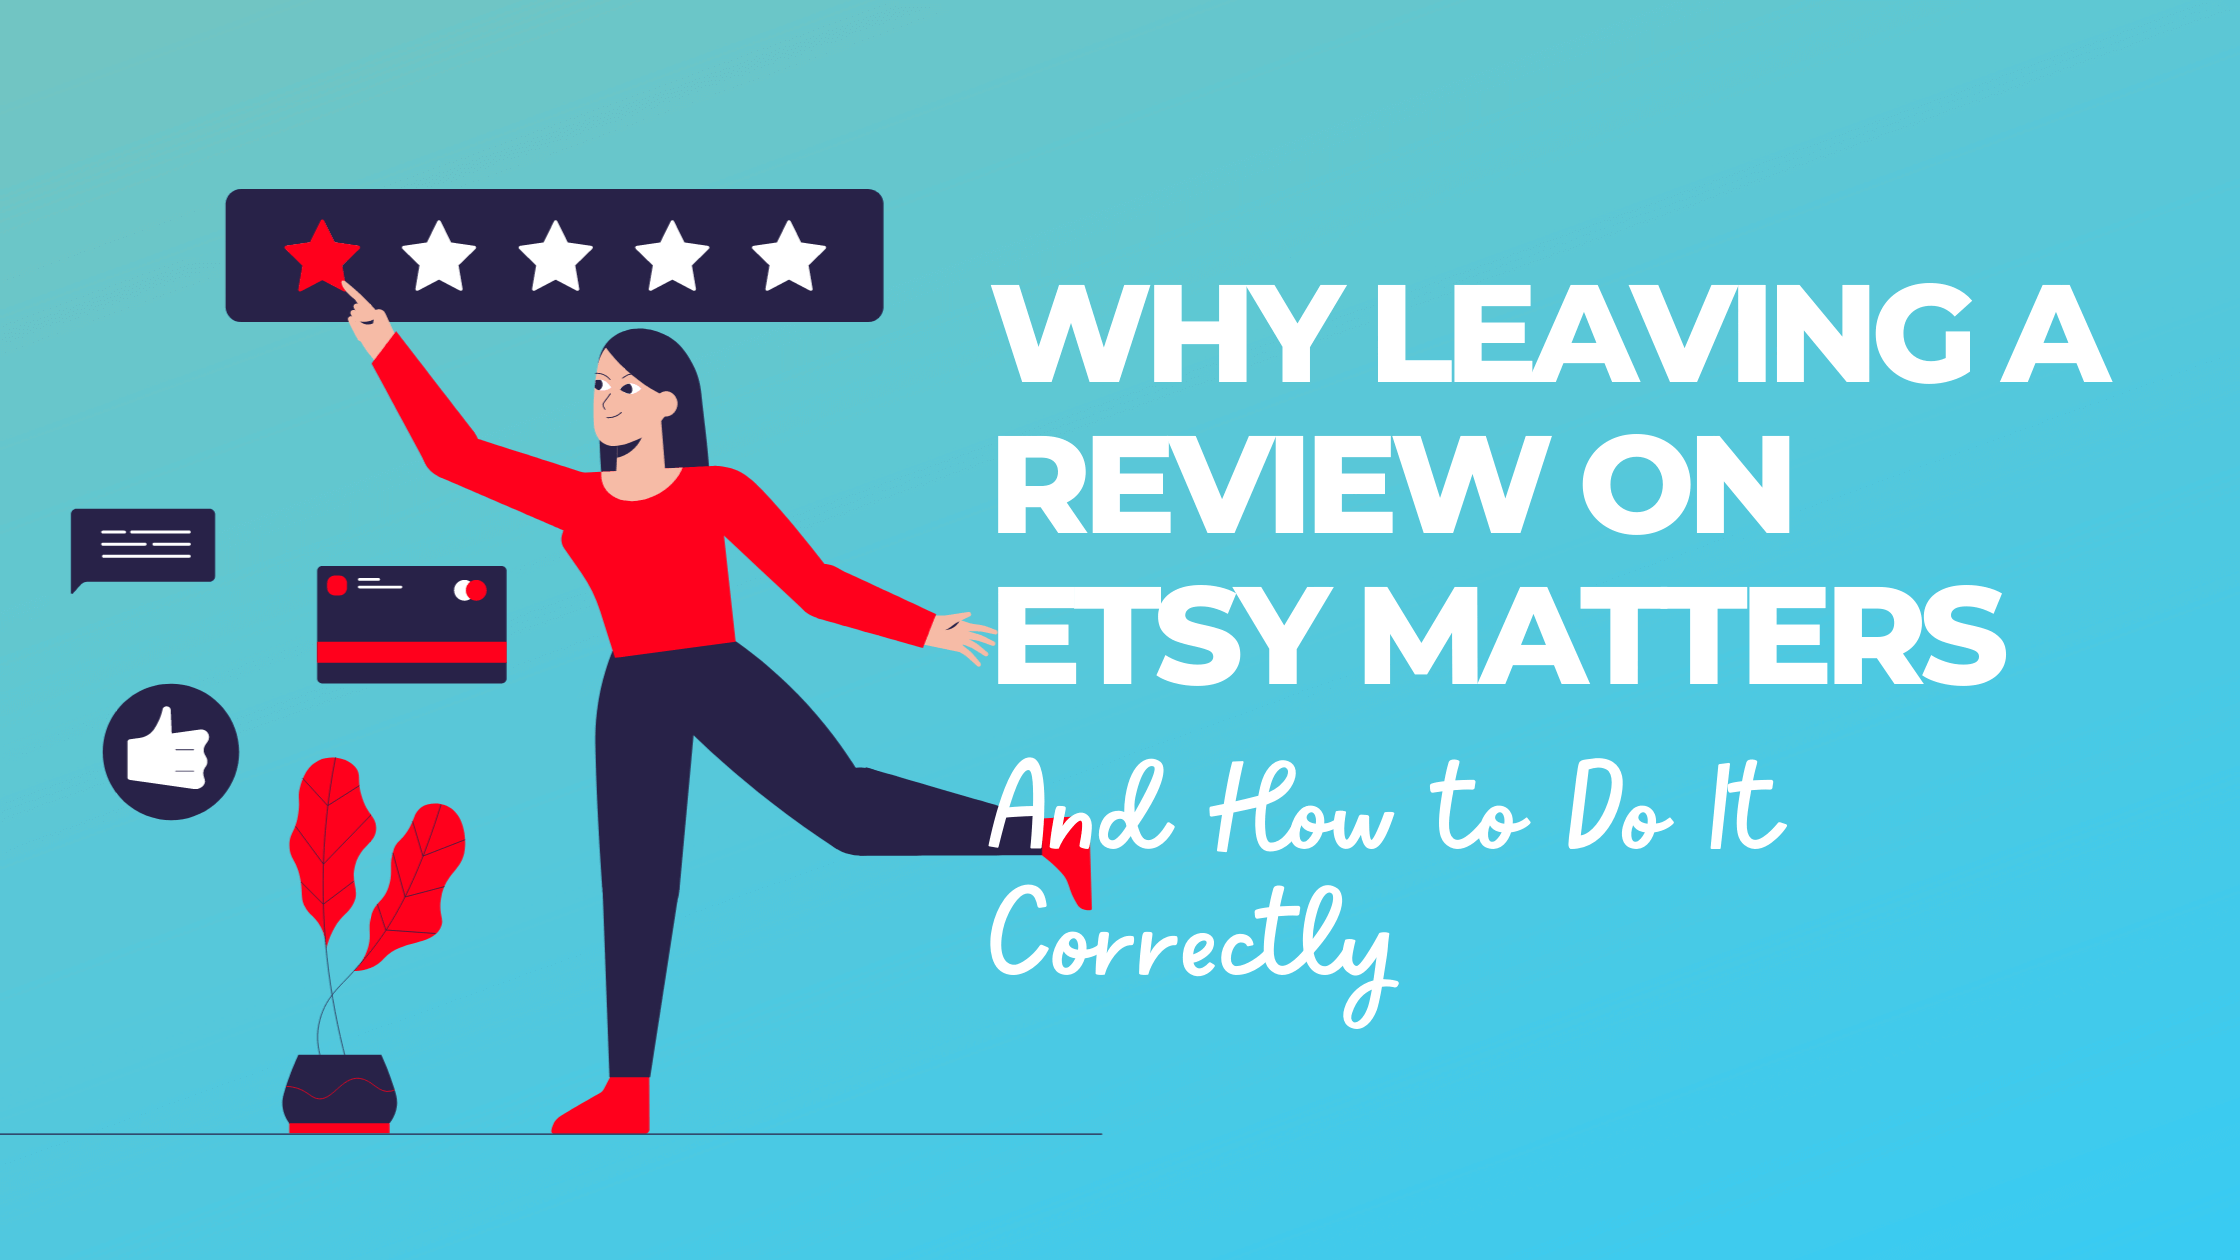 How to Leave a Review on Etsy: Making Your Voice Heard